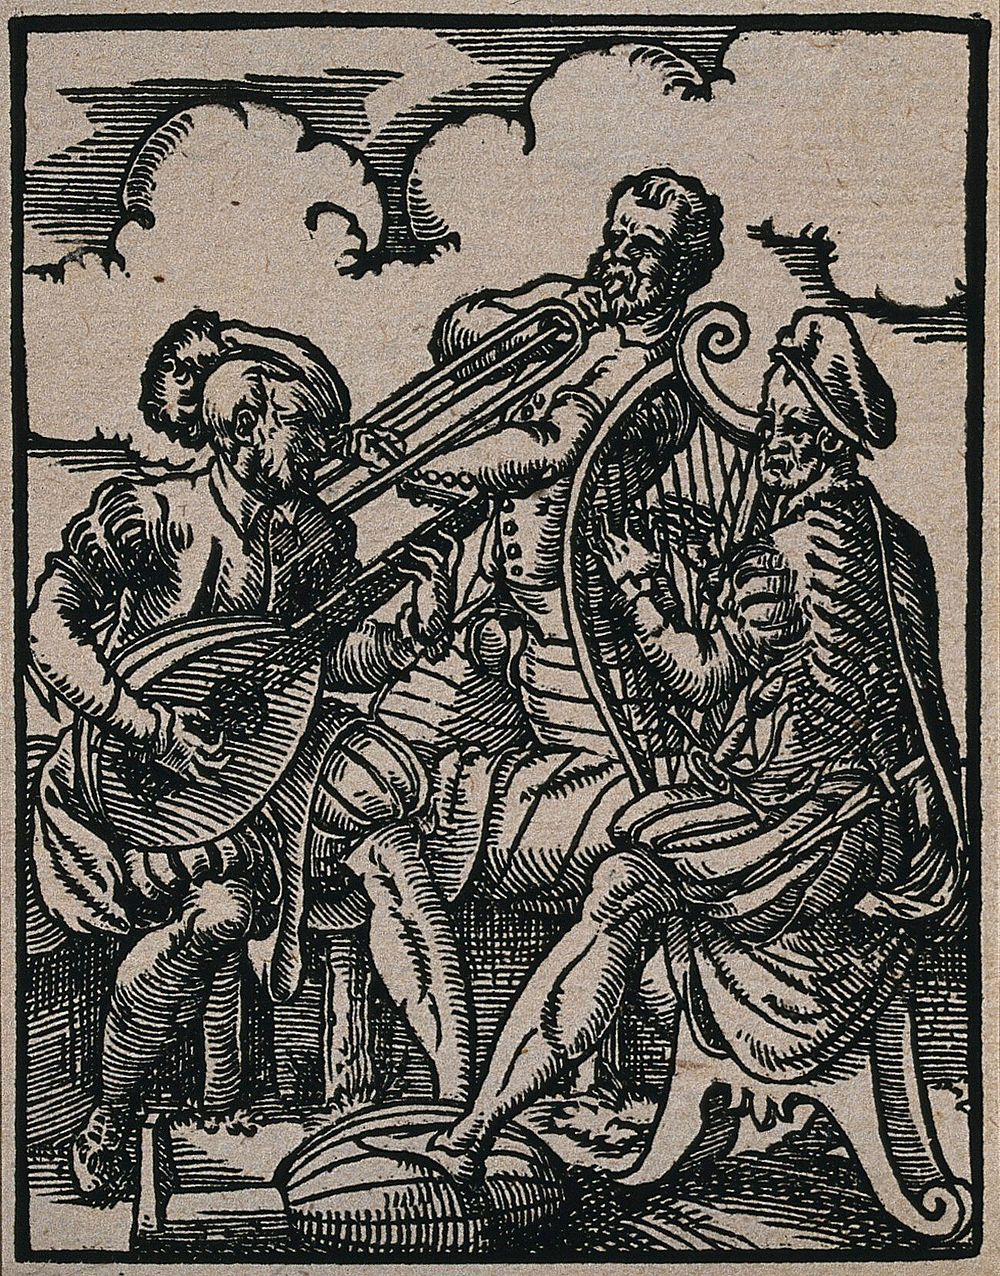 Three men playing wind and string instruments. Woodcut by Jost Amman, 1568.